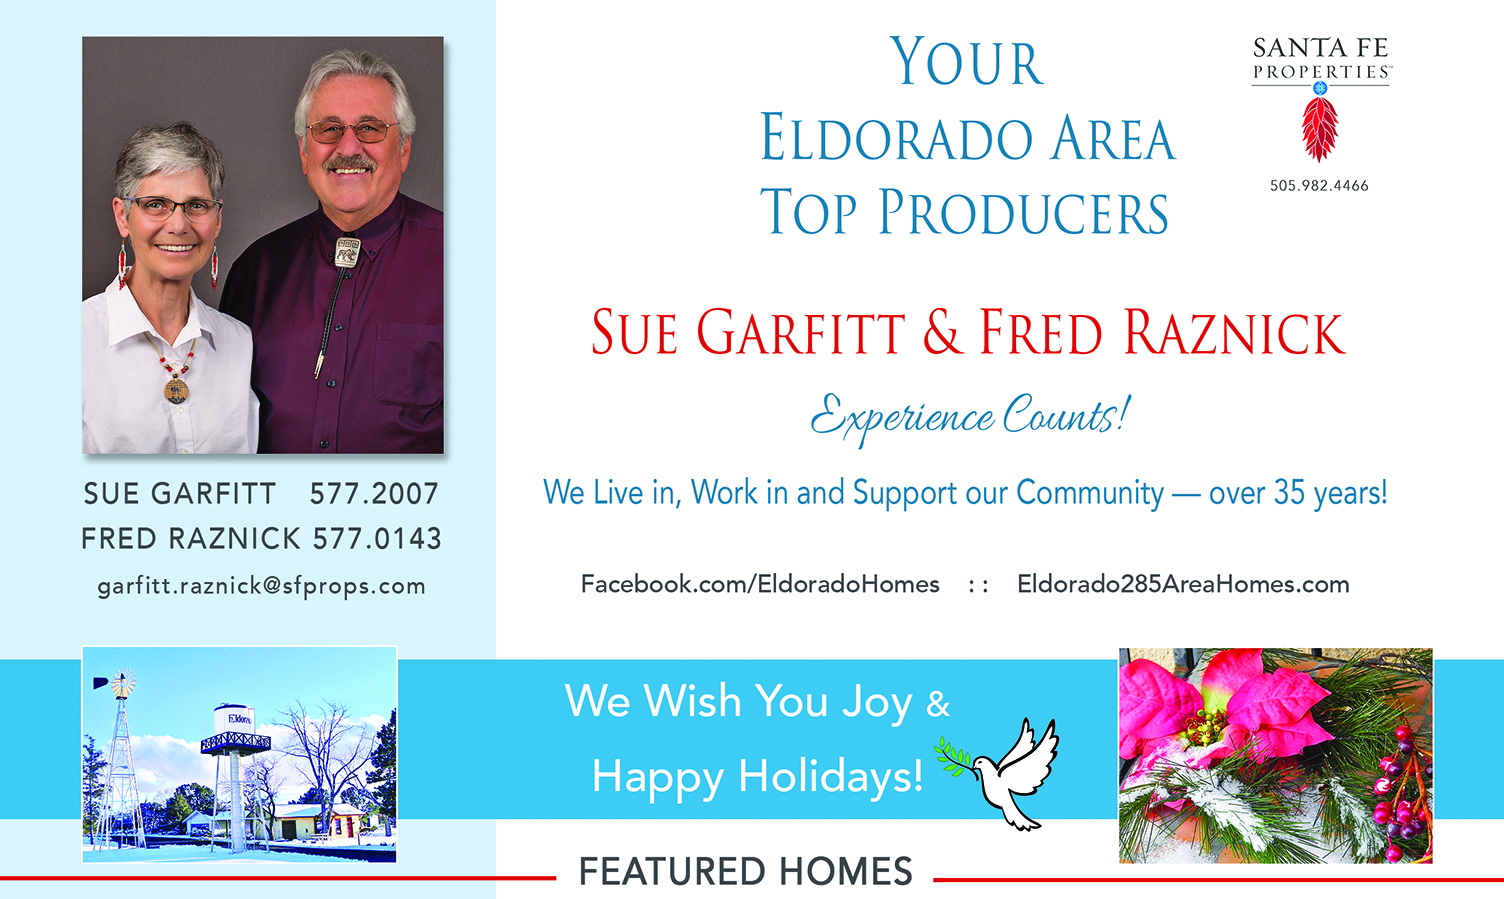 Look for our ad in the December issue of Eldorado Living